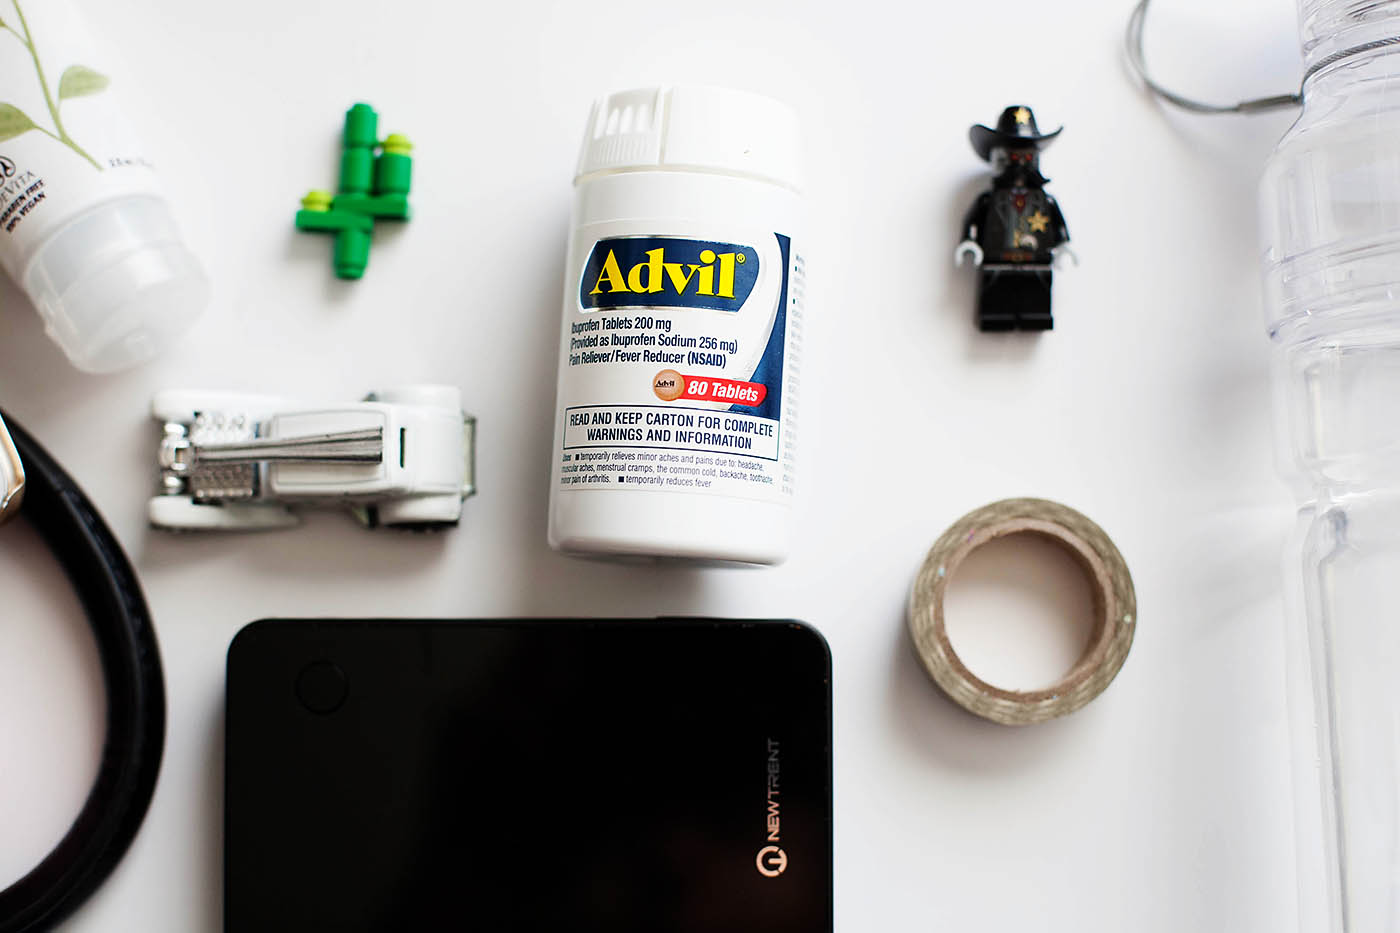 What's in my bag for a mom on-the-go #FastAdvil